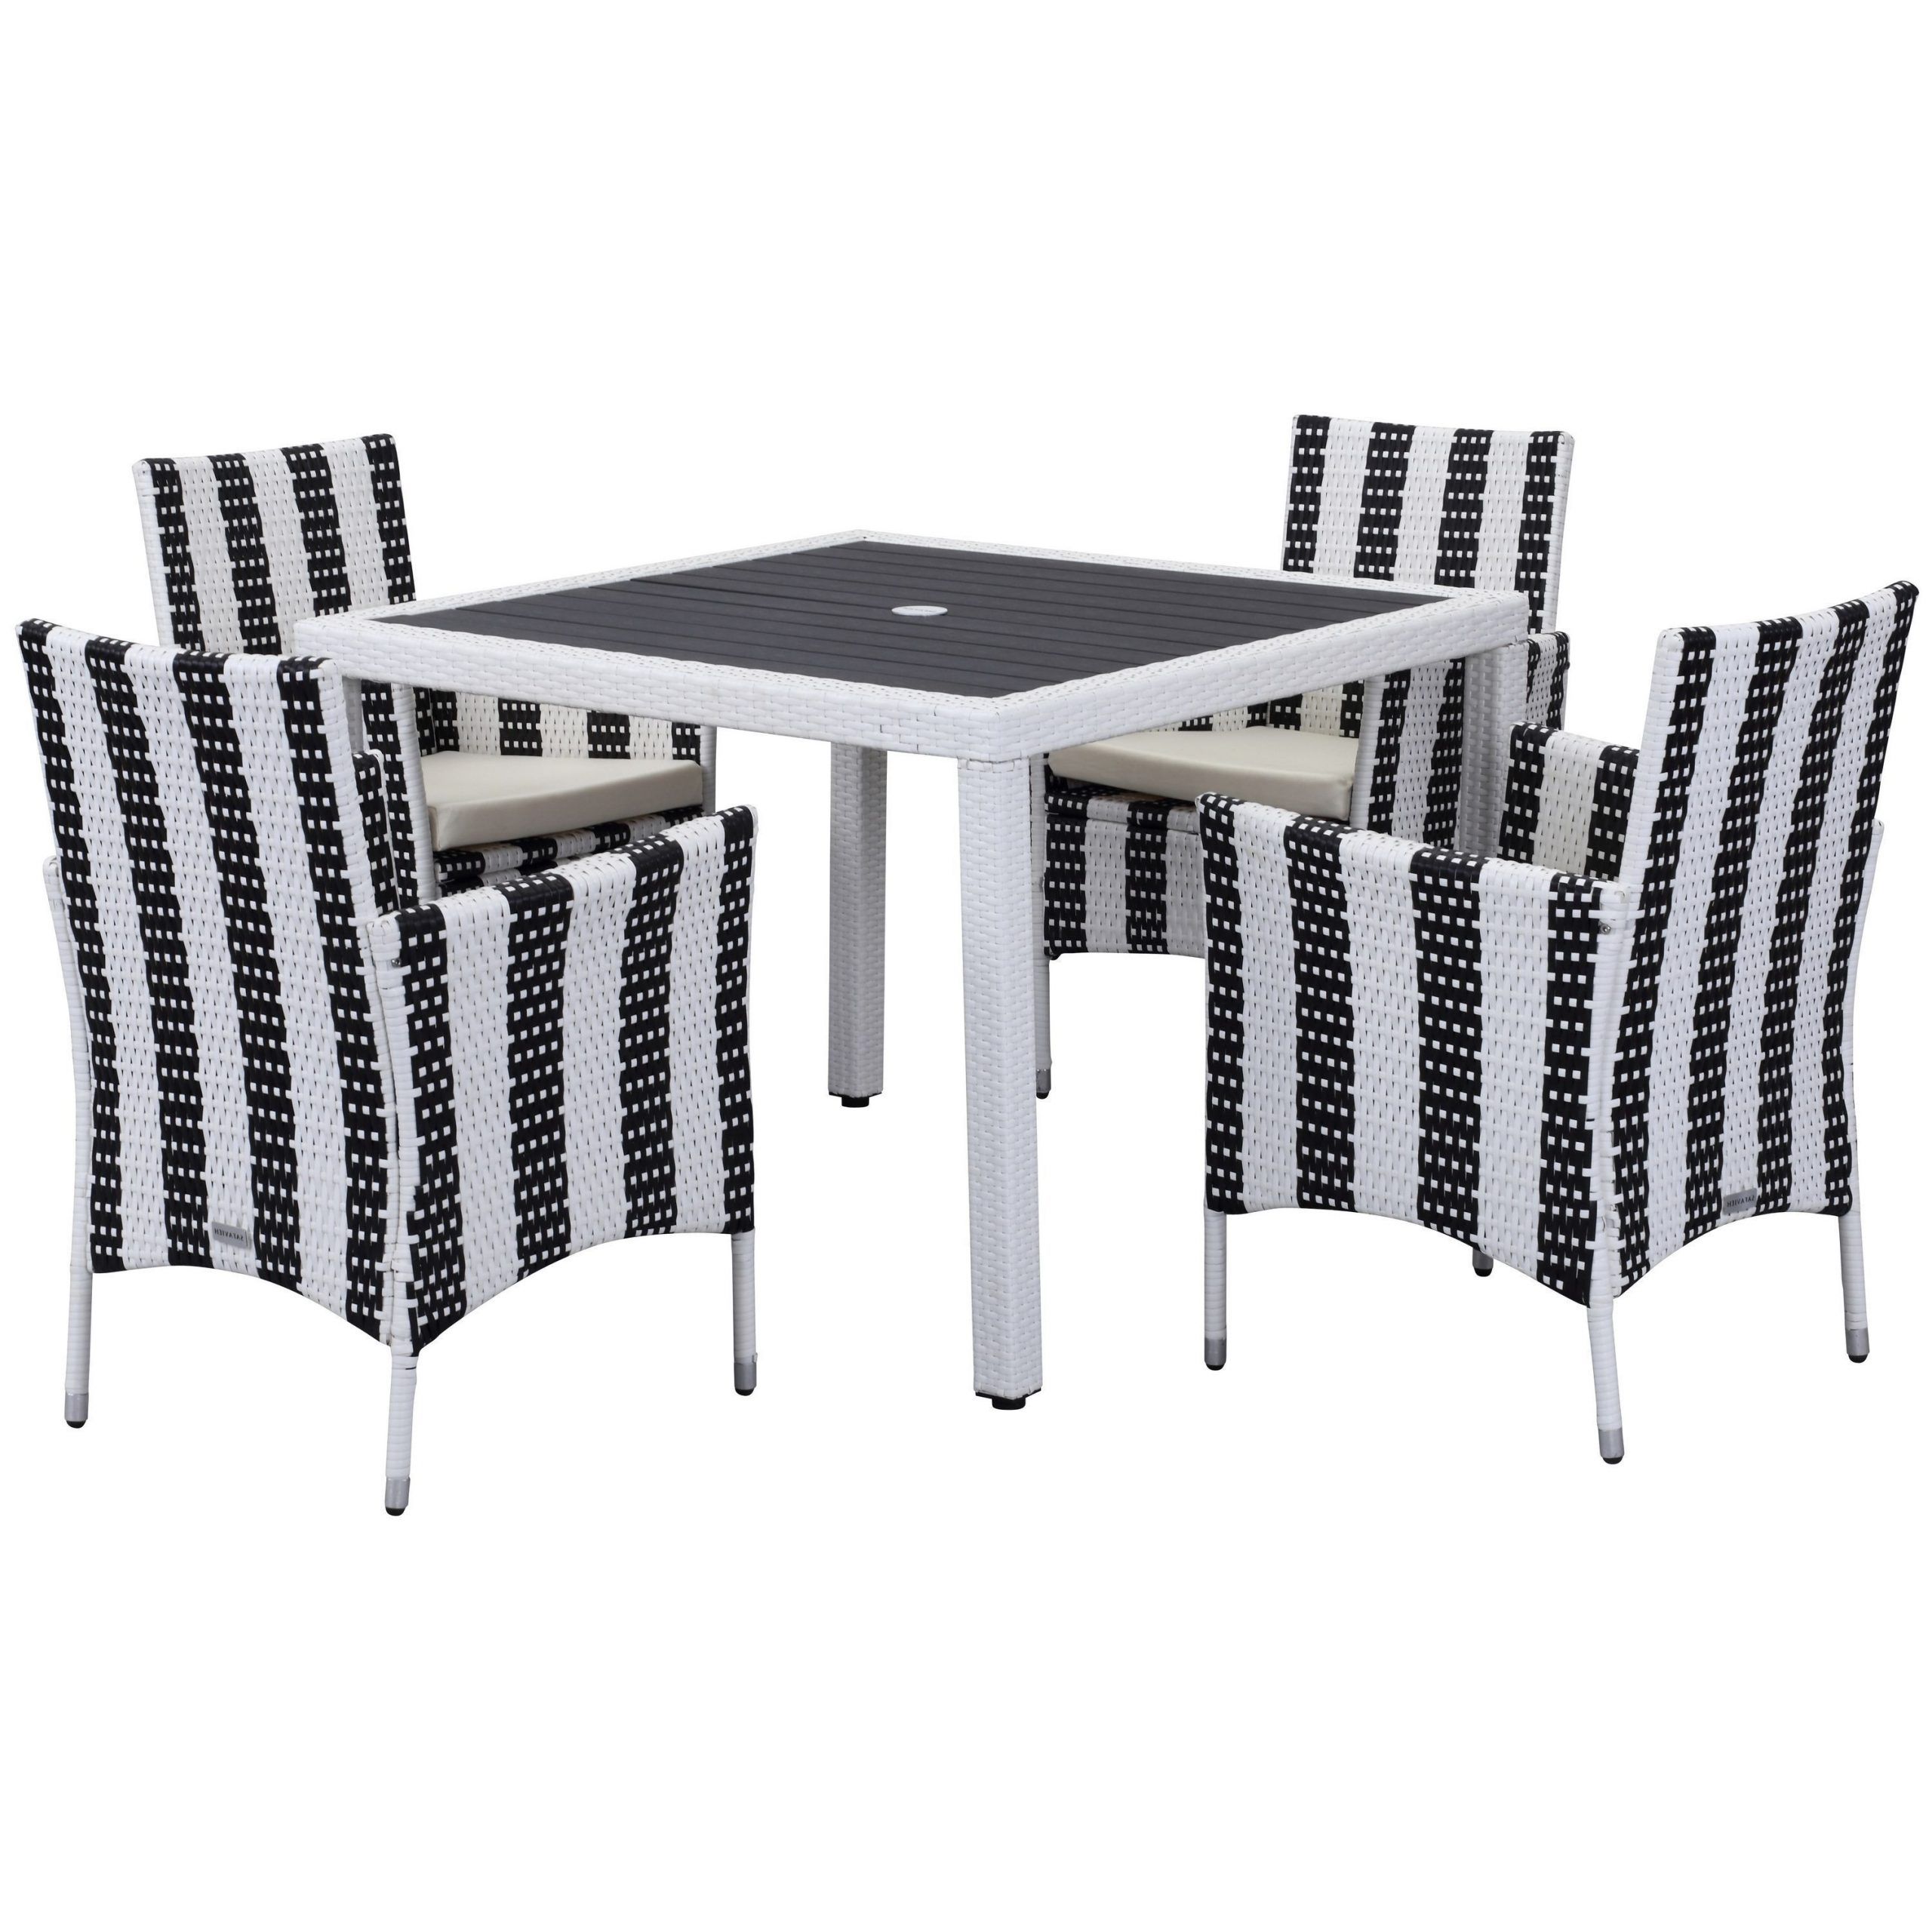 Popular Safavieh Outdoor Living Frazier Black/ White Dining Set (5 Piece) (pvc Regarding Black Outdoor Dining Modern Chairs Sets (View 2 of 15)